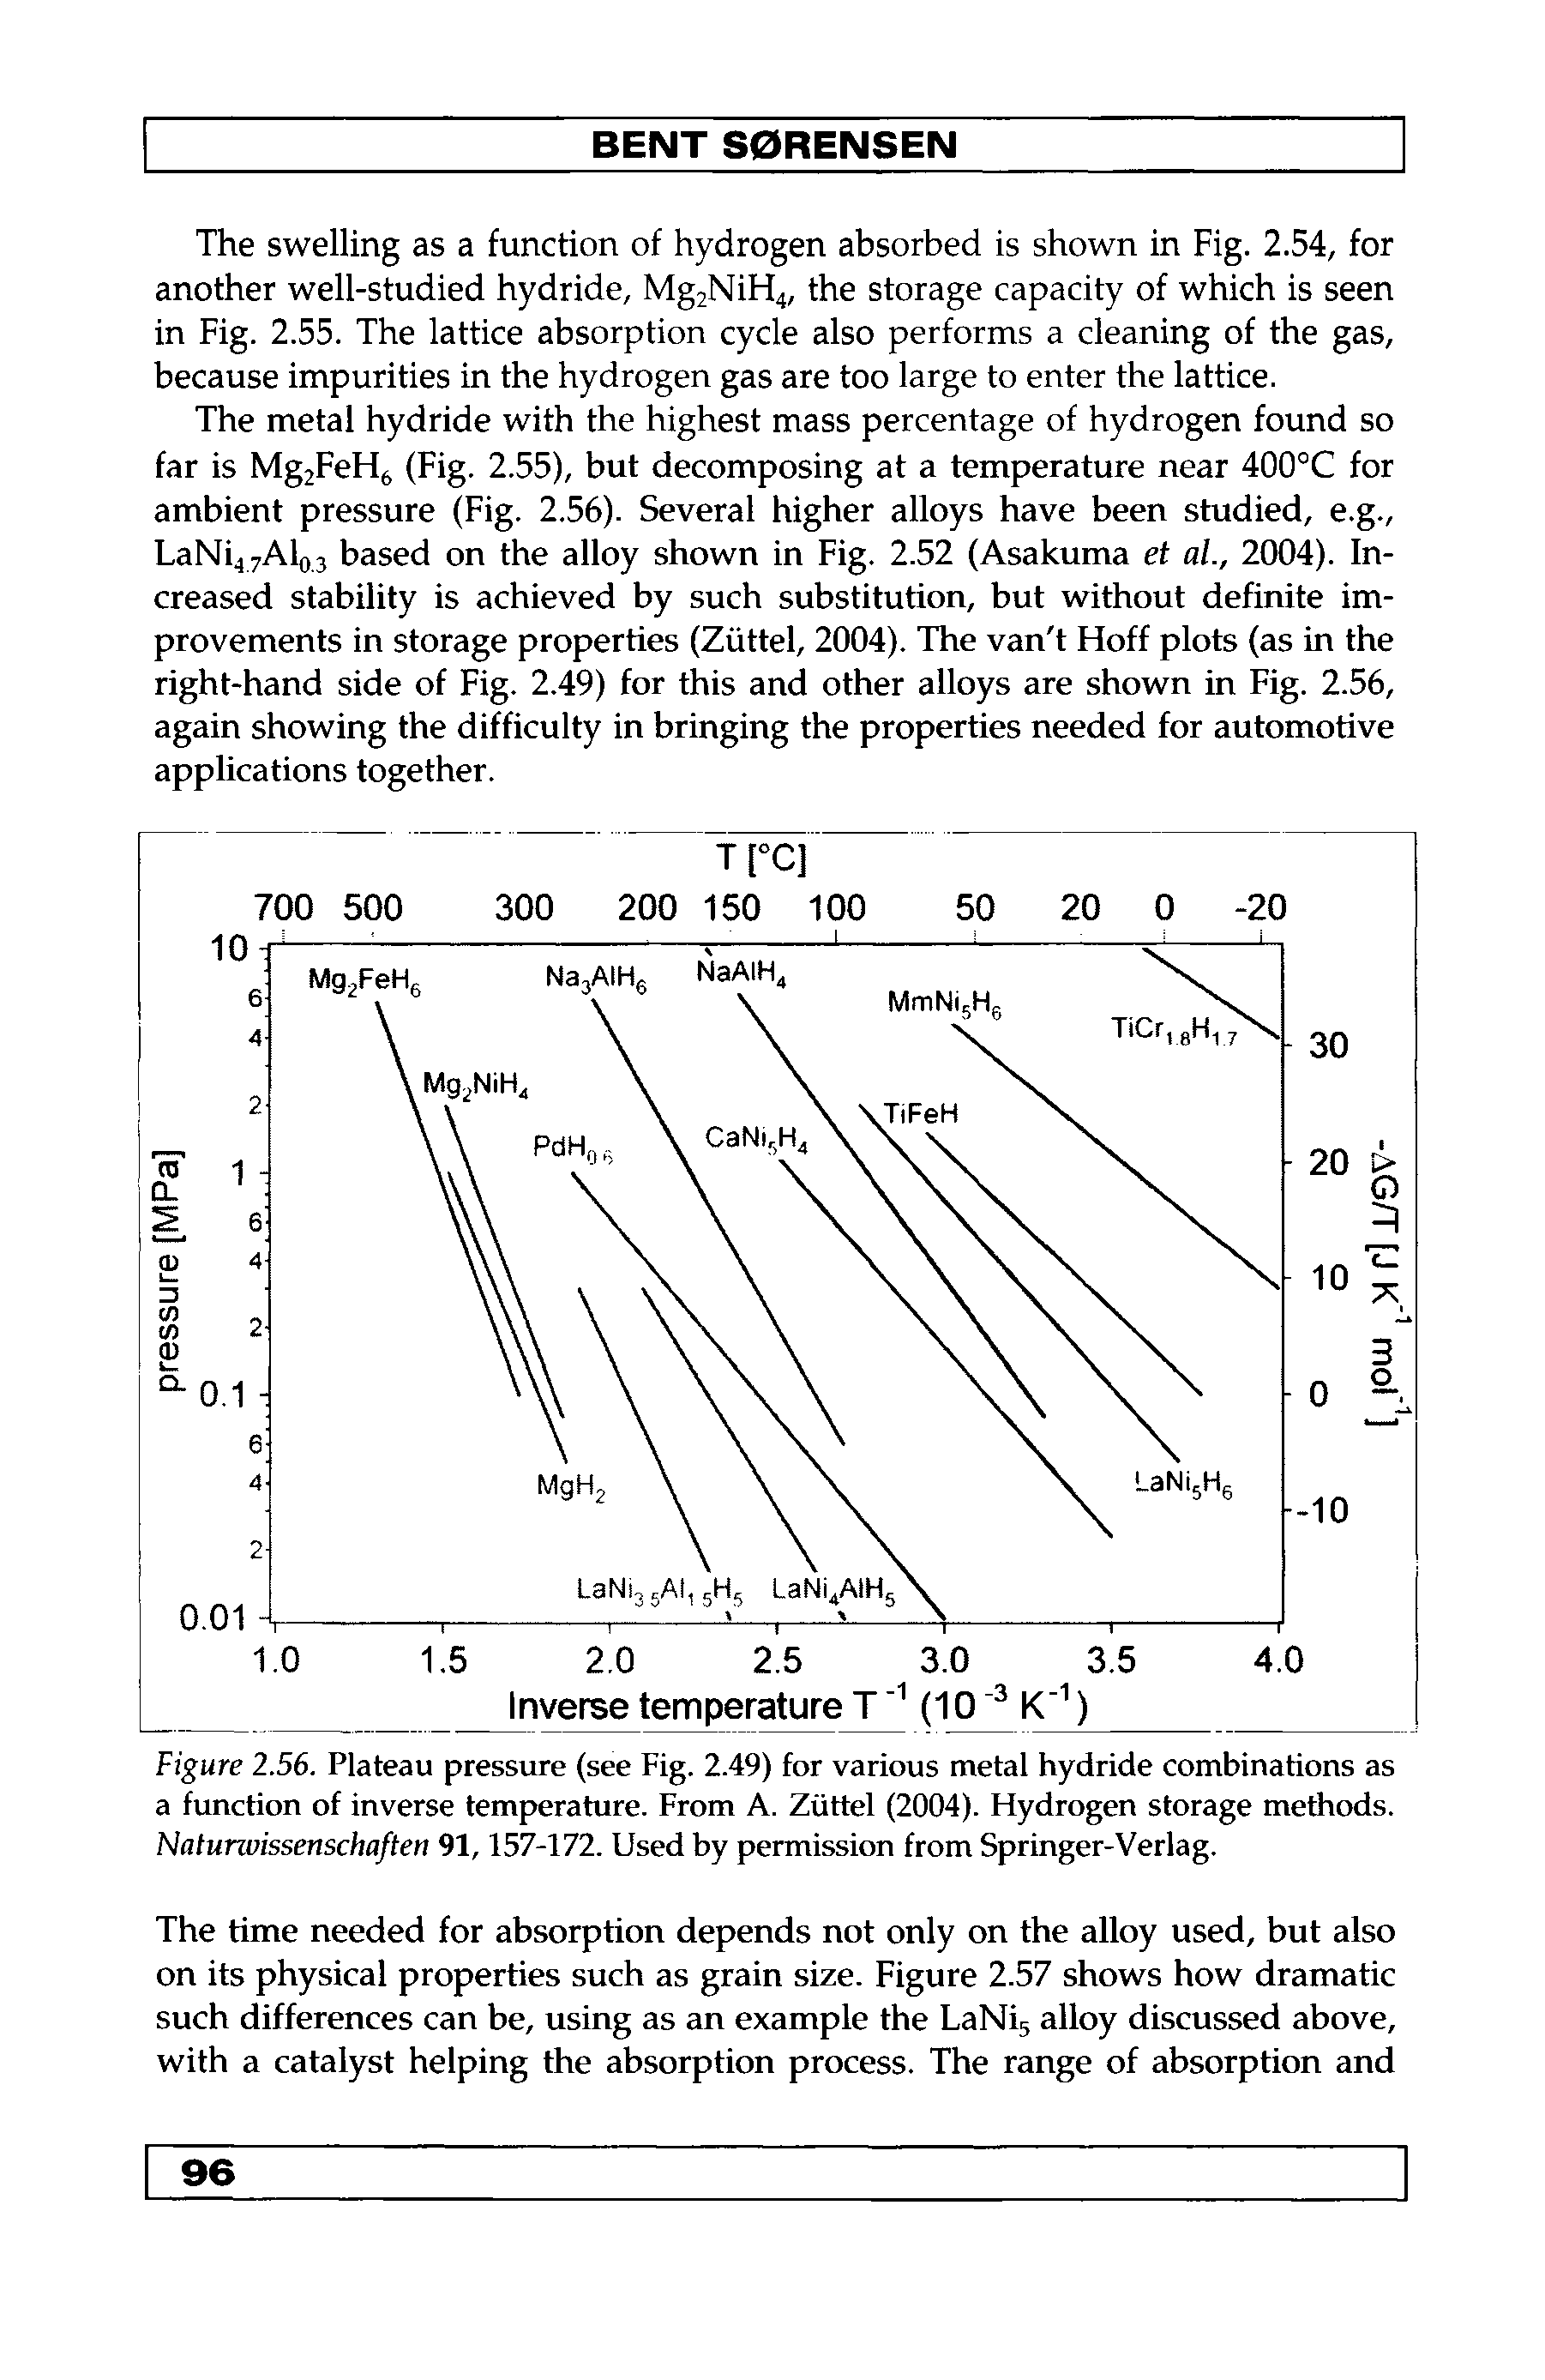 Figure 2.56. Plateau pressure (see Fig. 2.49) for various metal hydride combinations as a function of inverse temperature. From A. Ziittel (2004). Hydrogen storage methods. Naturwissenschaften 91,157-172. Used by permission from Springer-Verlag.